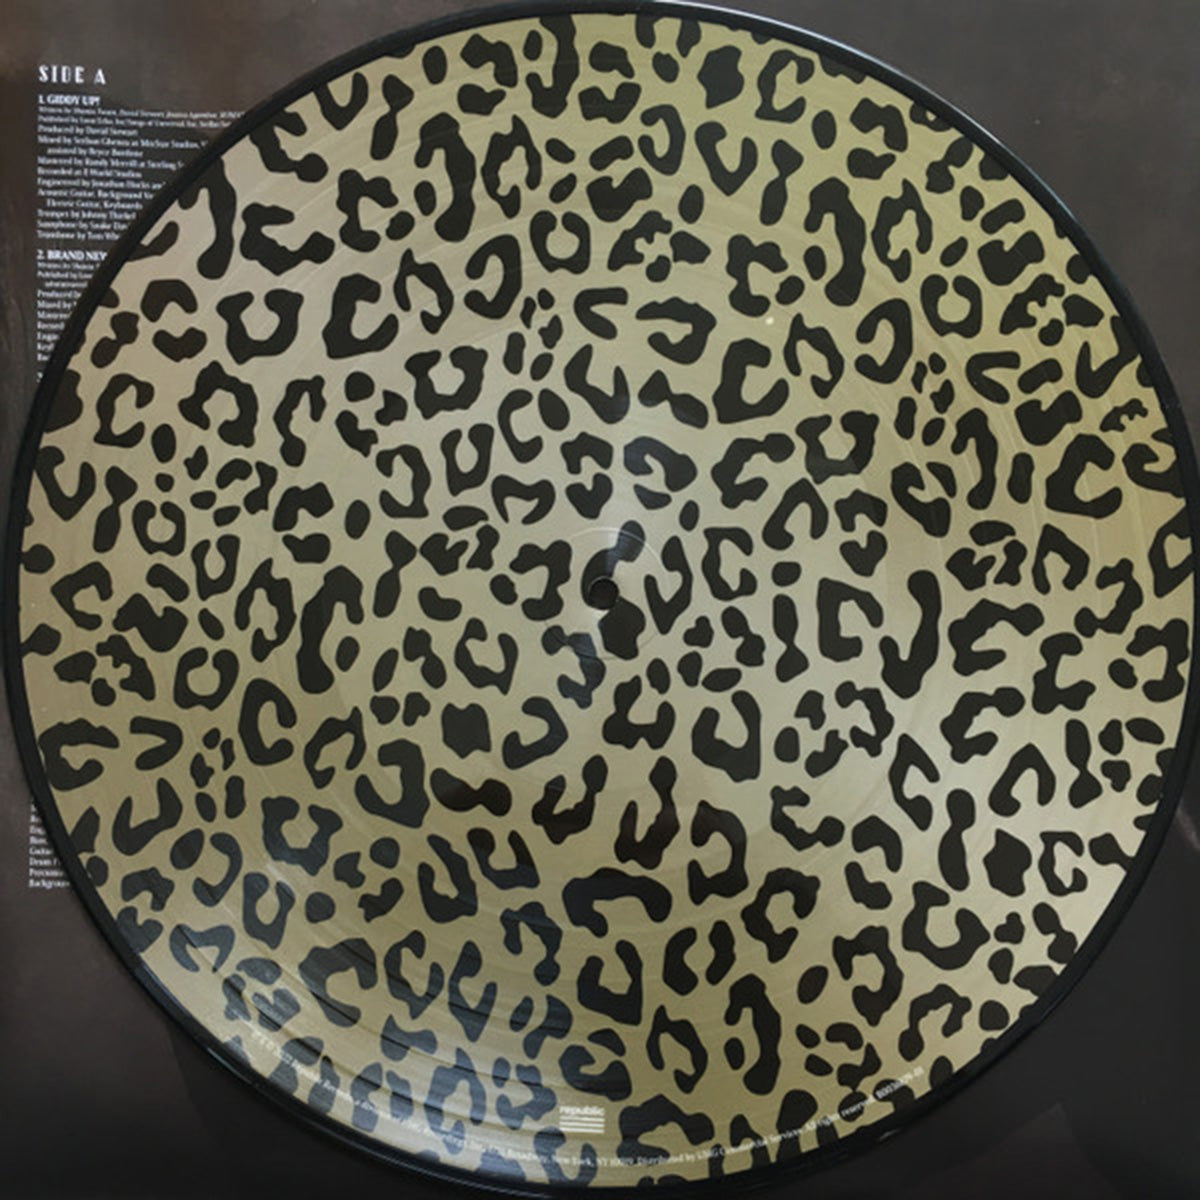 Shania Twain – Queen Of Me - Sealed, Gold Leopard Print!